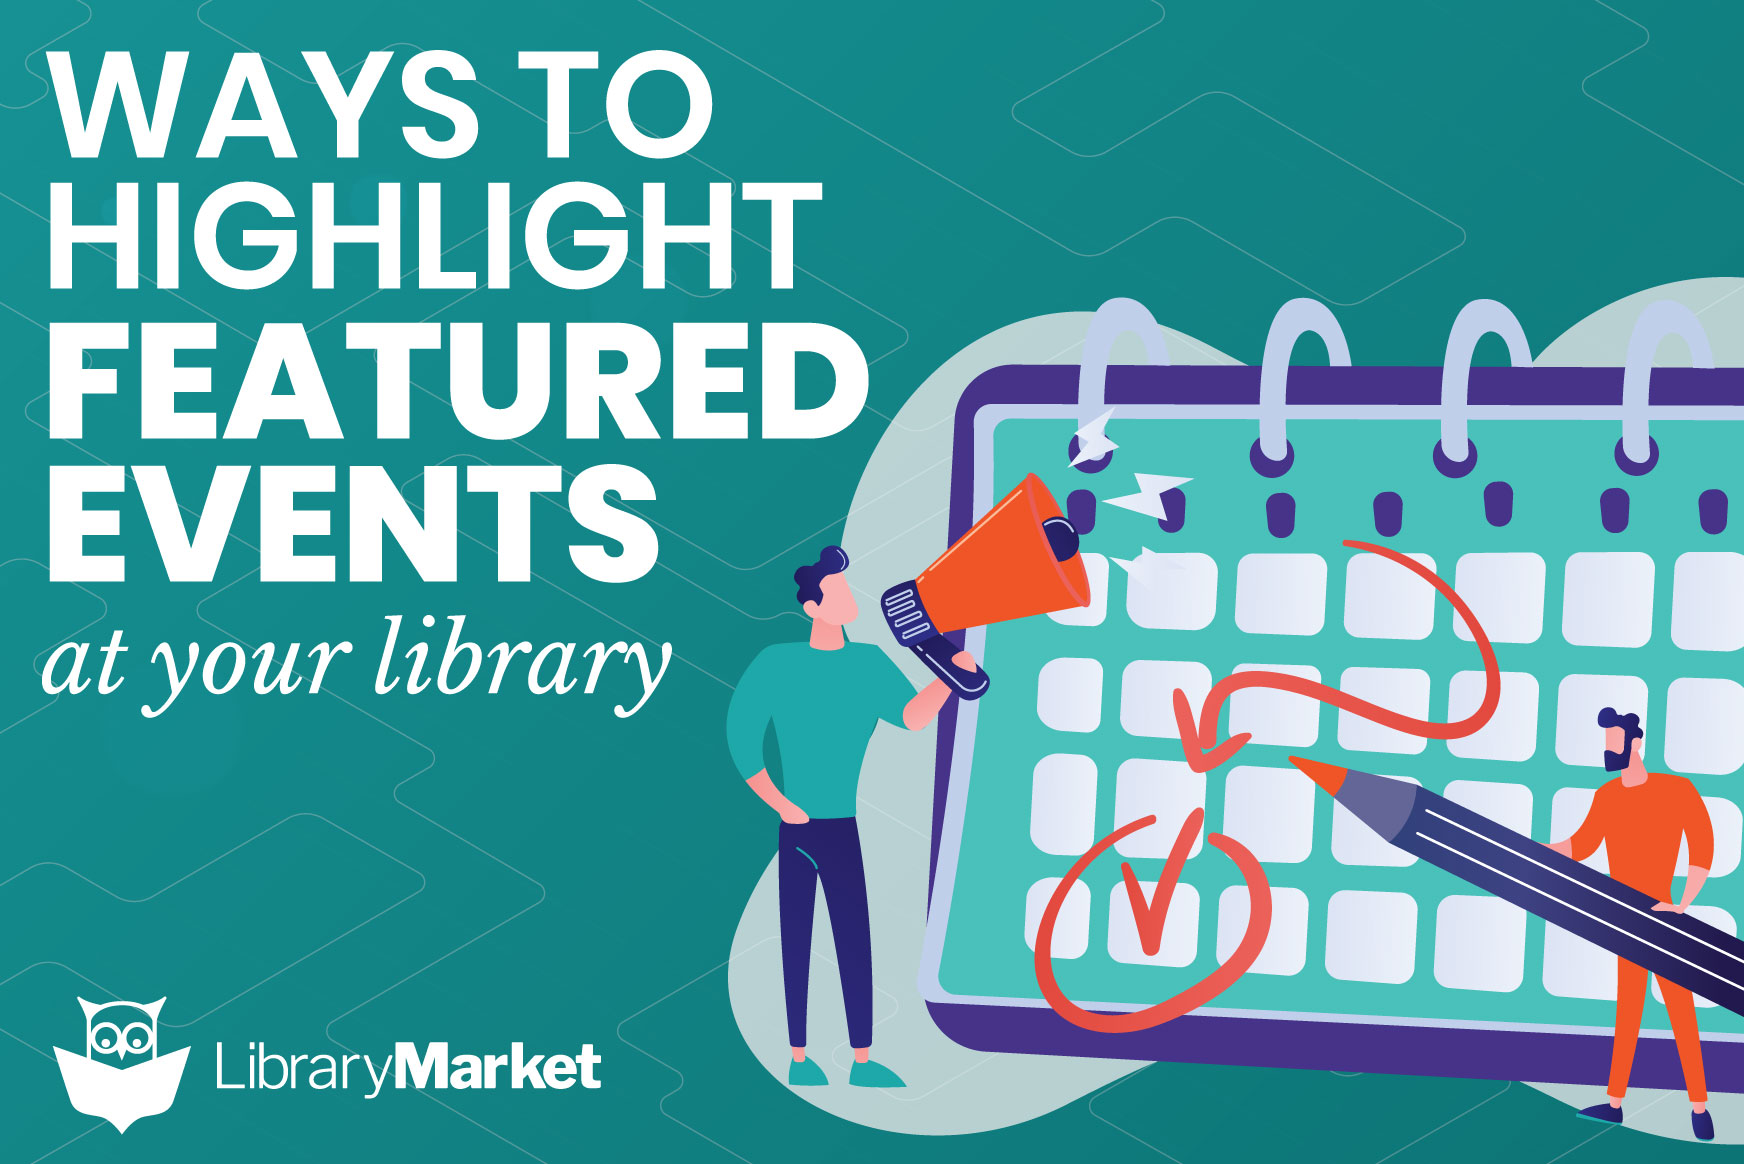 Ways to Highlight Featured Events at Your Library